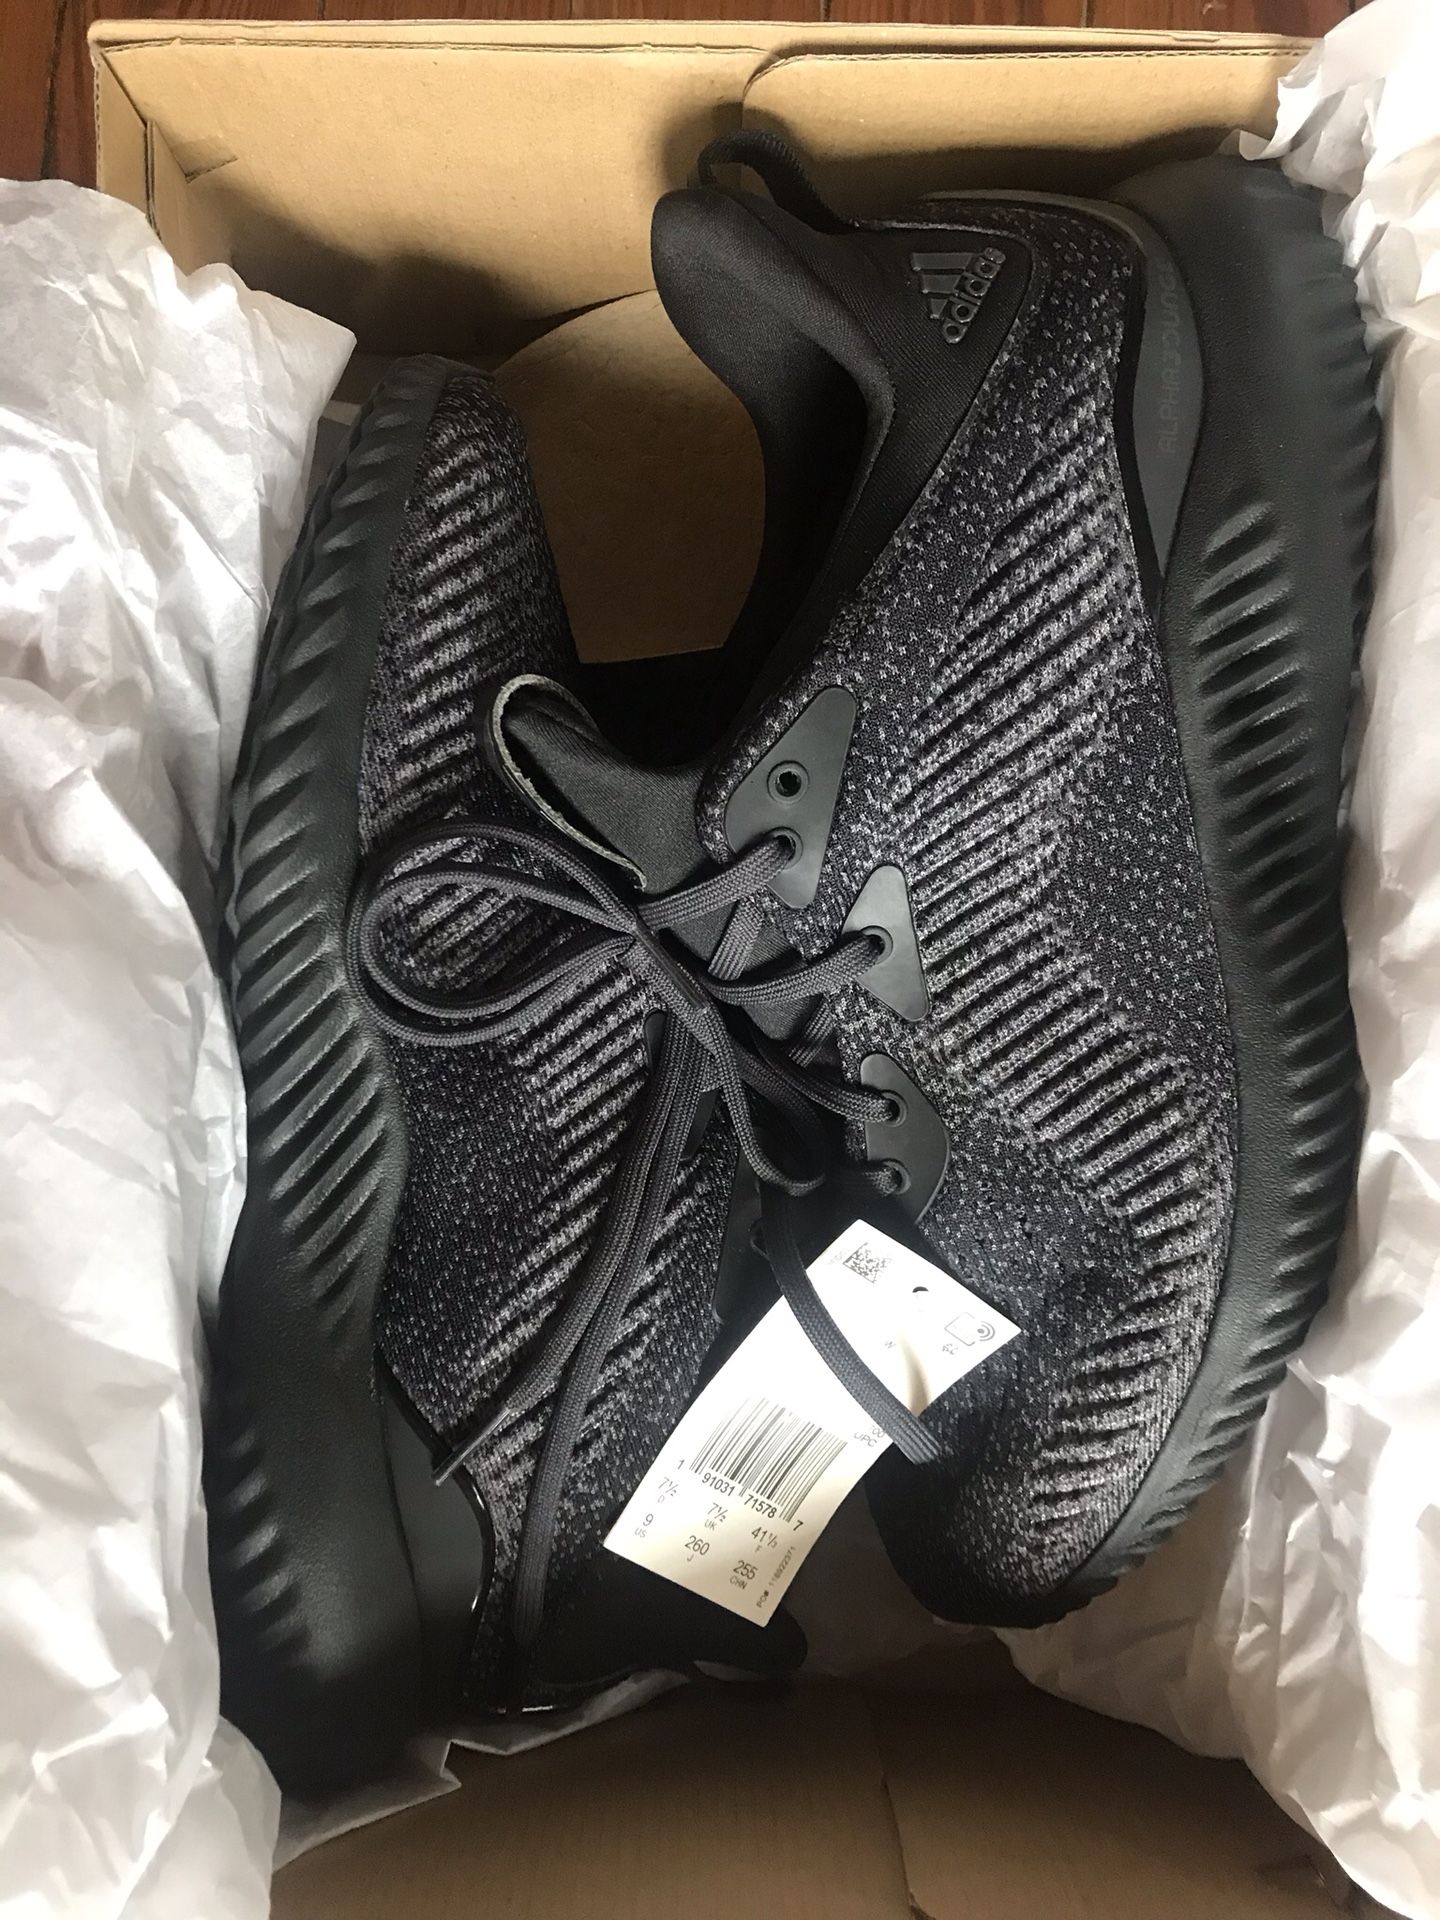 Adidas Alphabounce Size 9 Women’s Sneakers